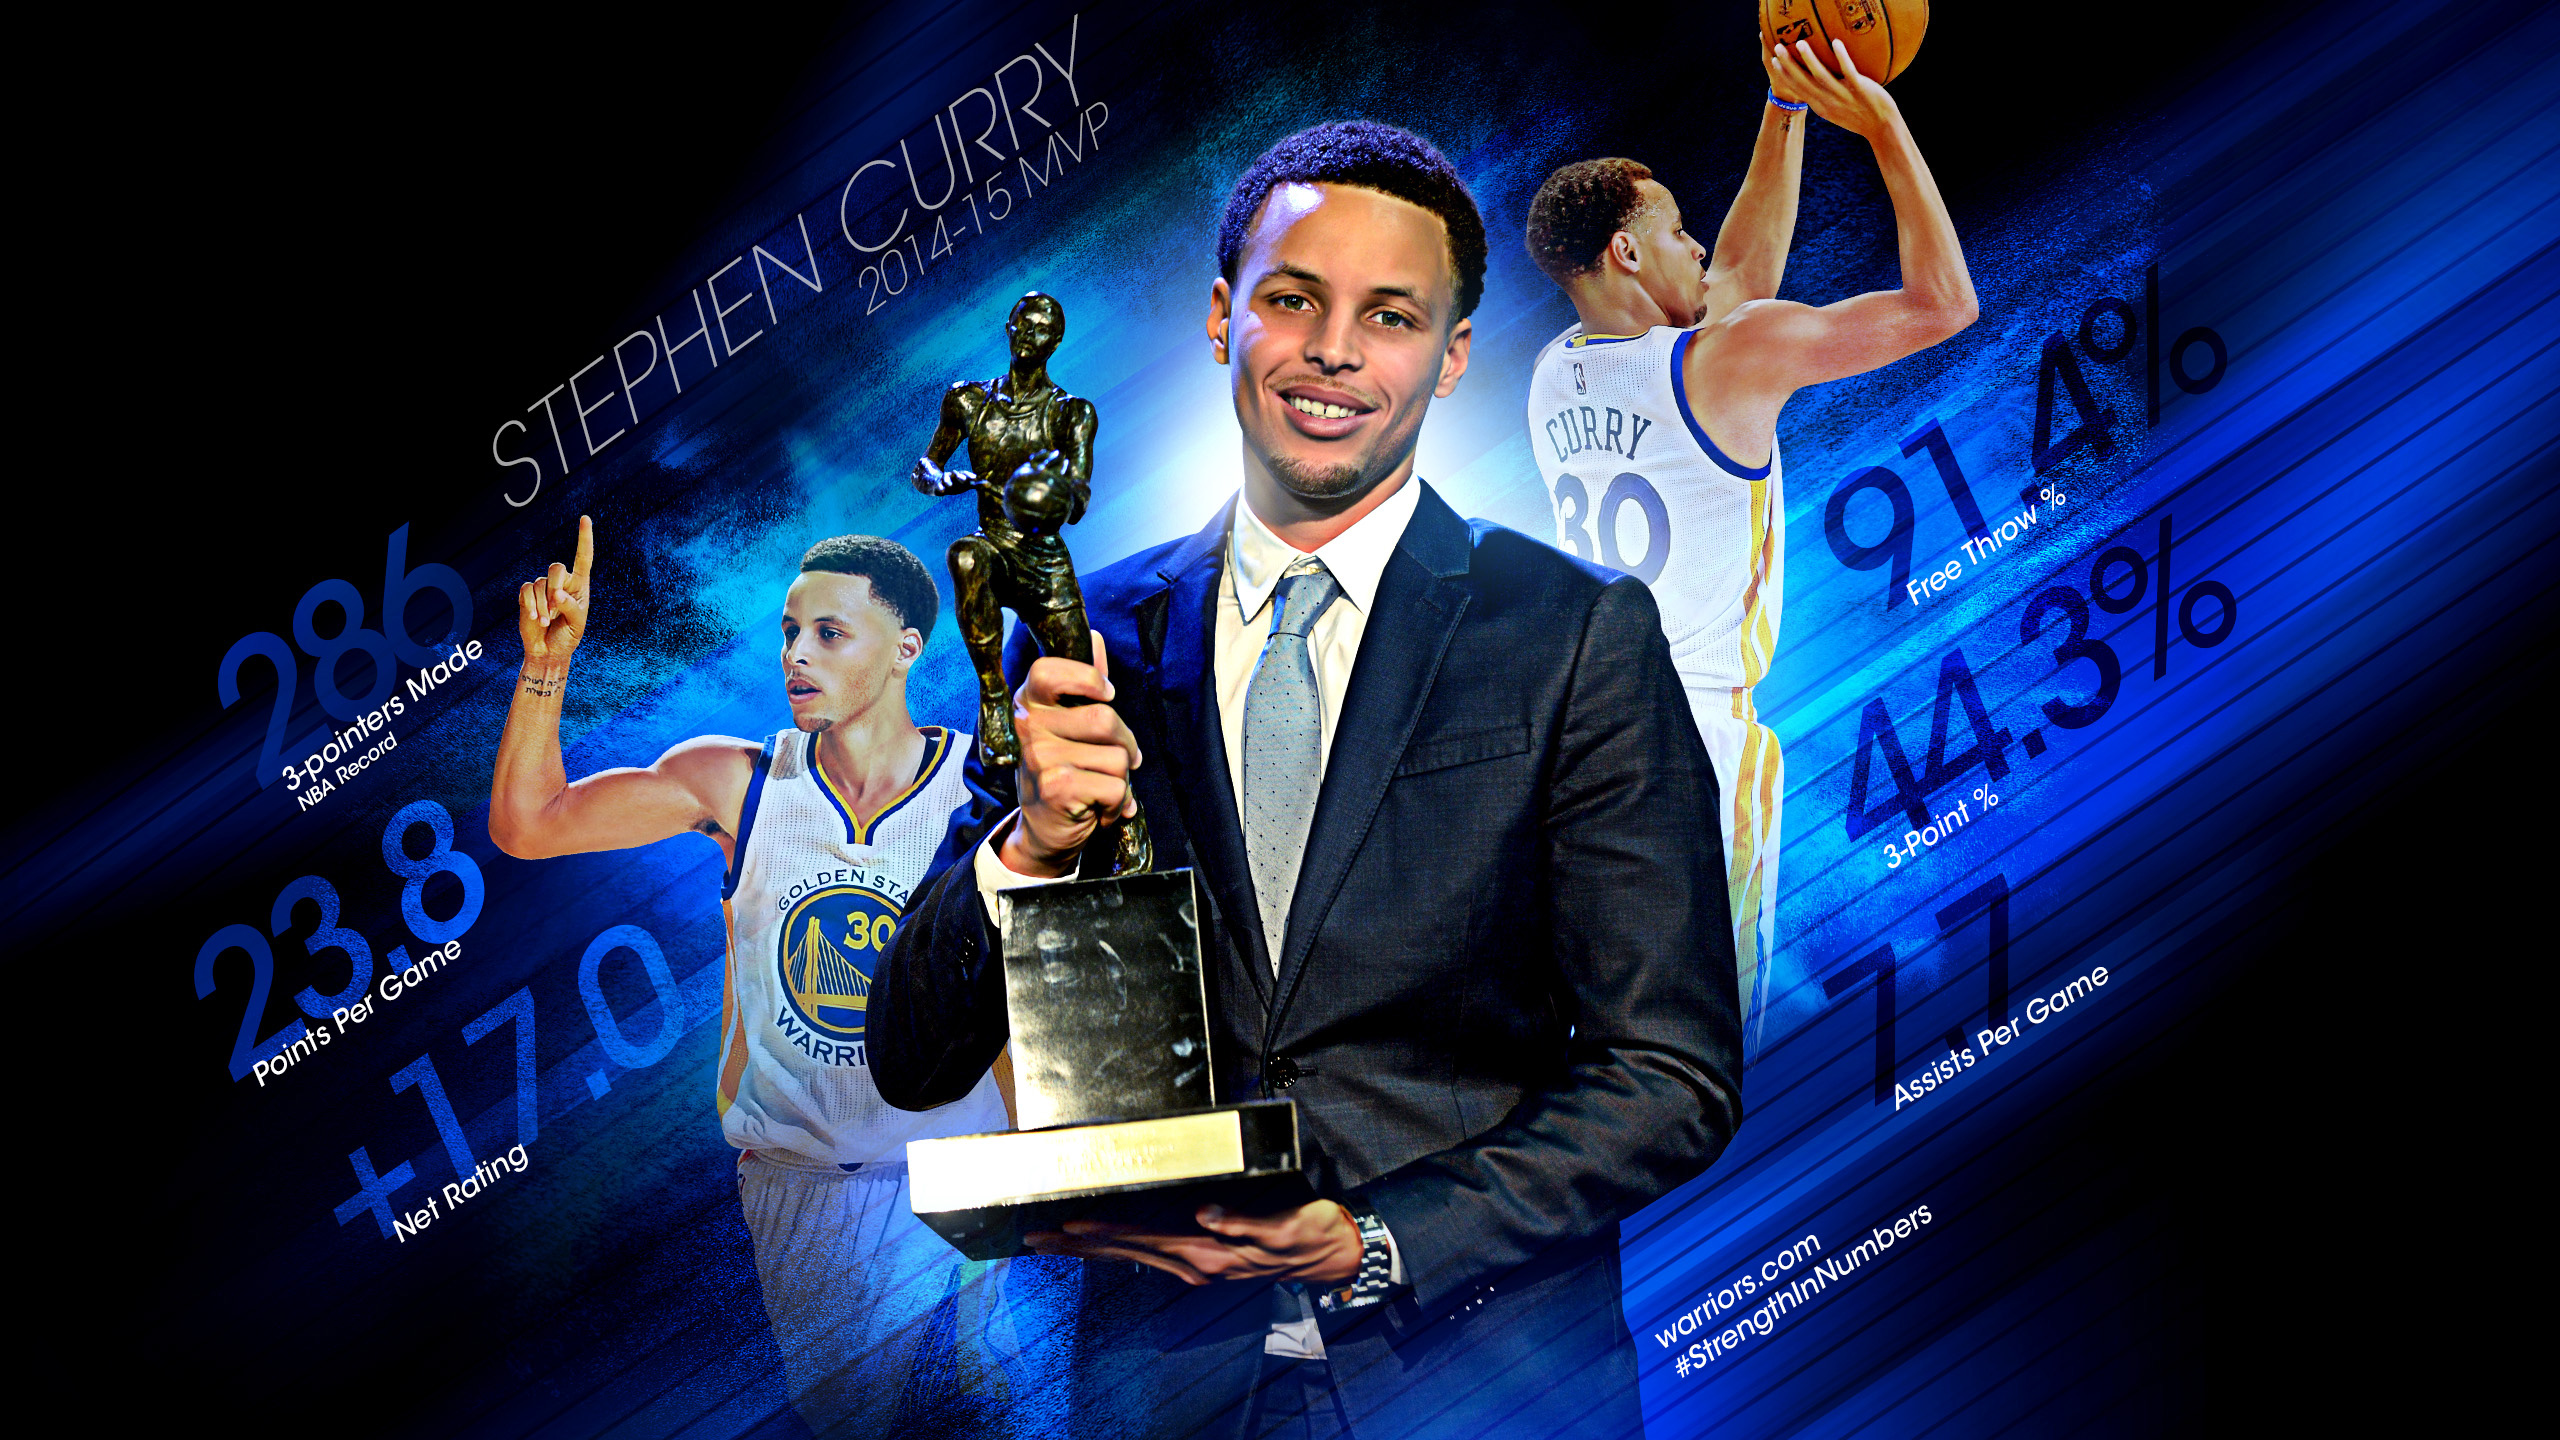 Curry 2015 Wallpapers